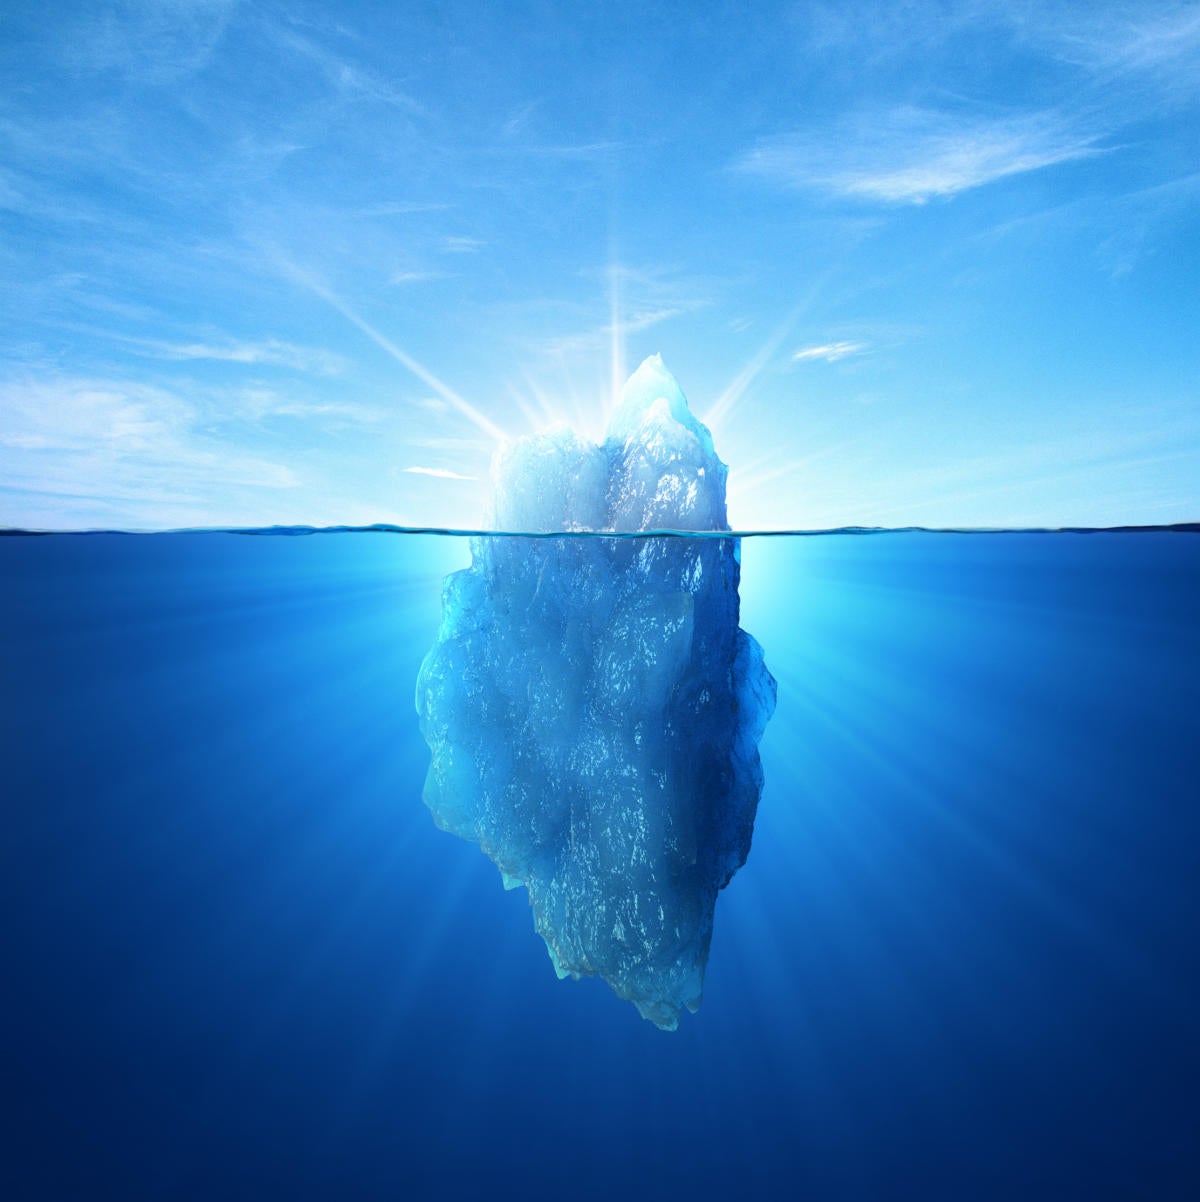 The tip of the data science iceberg